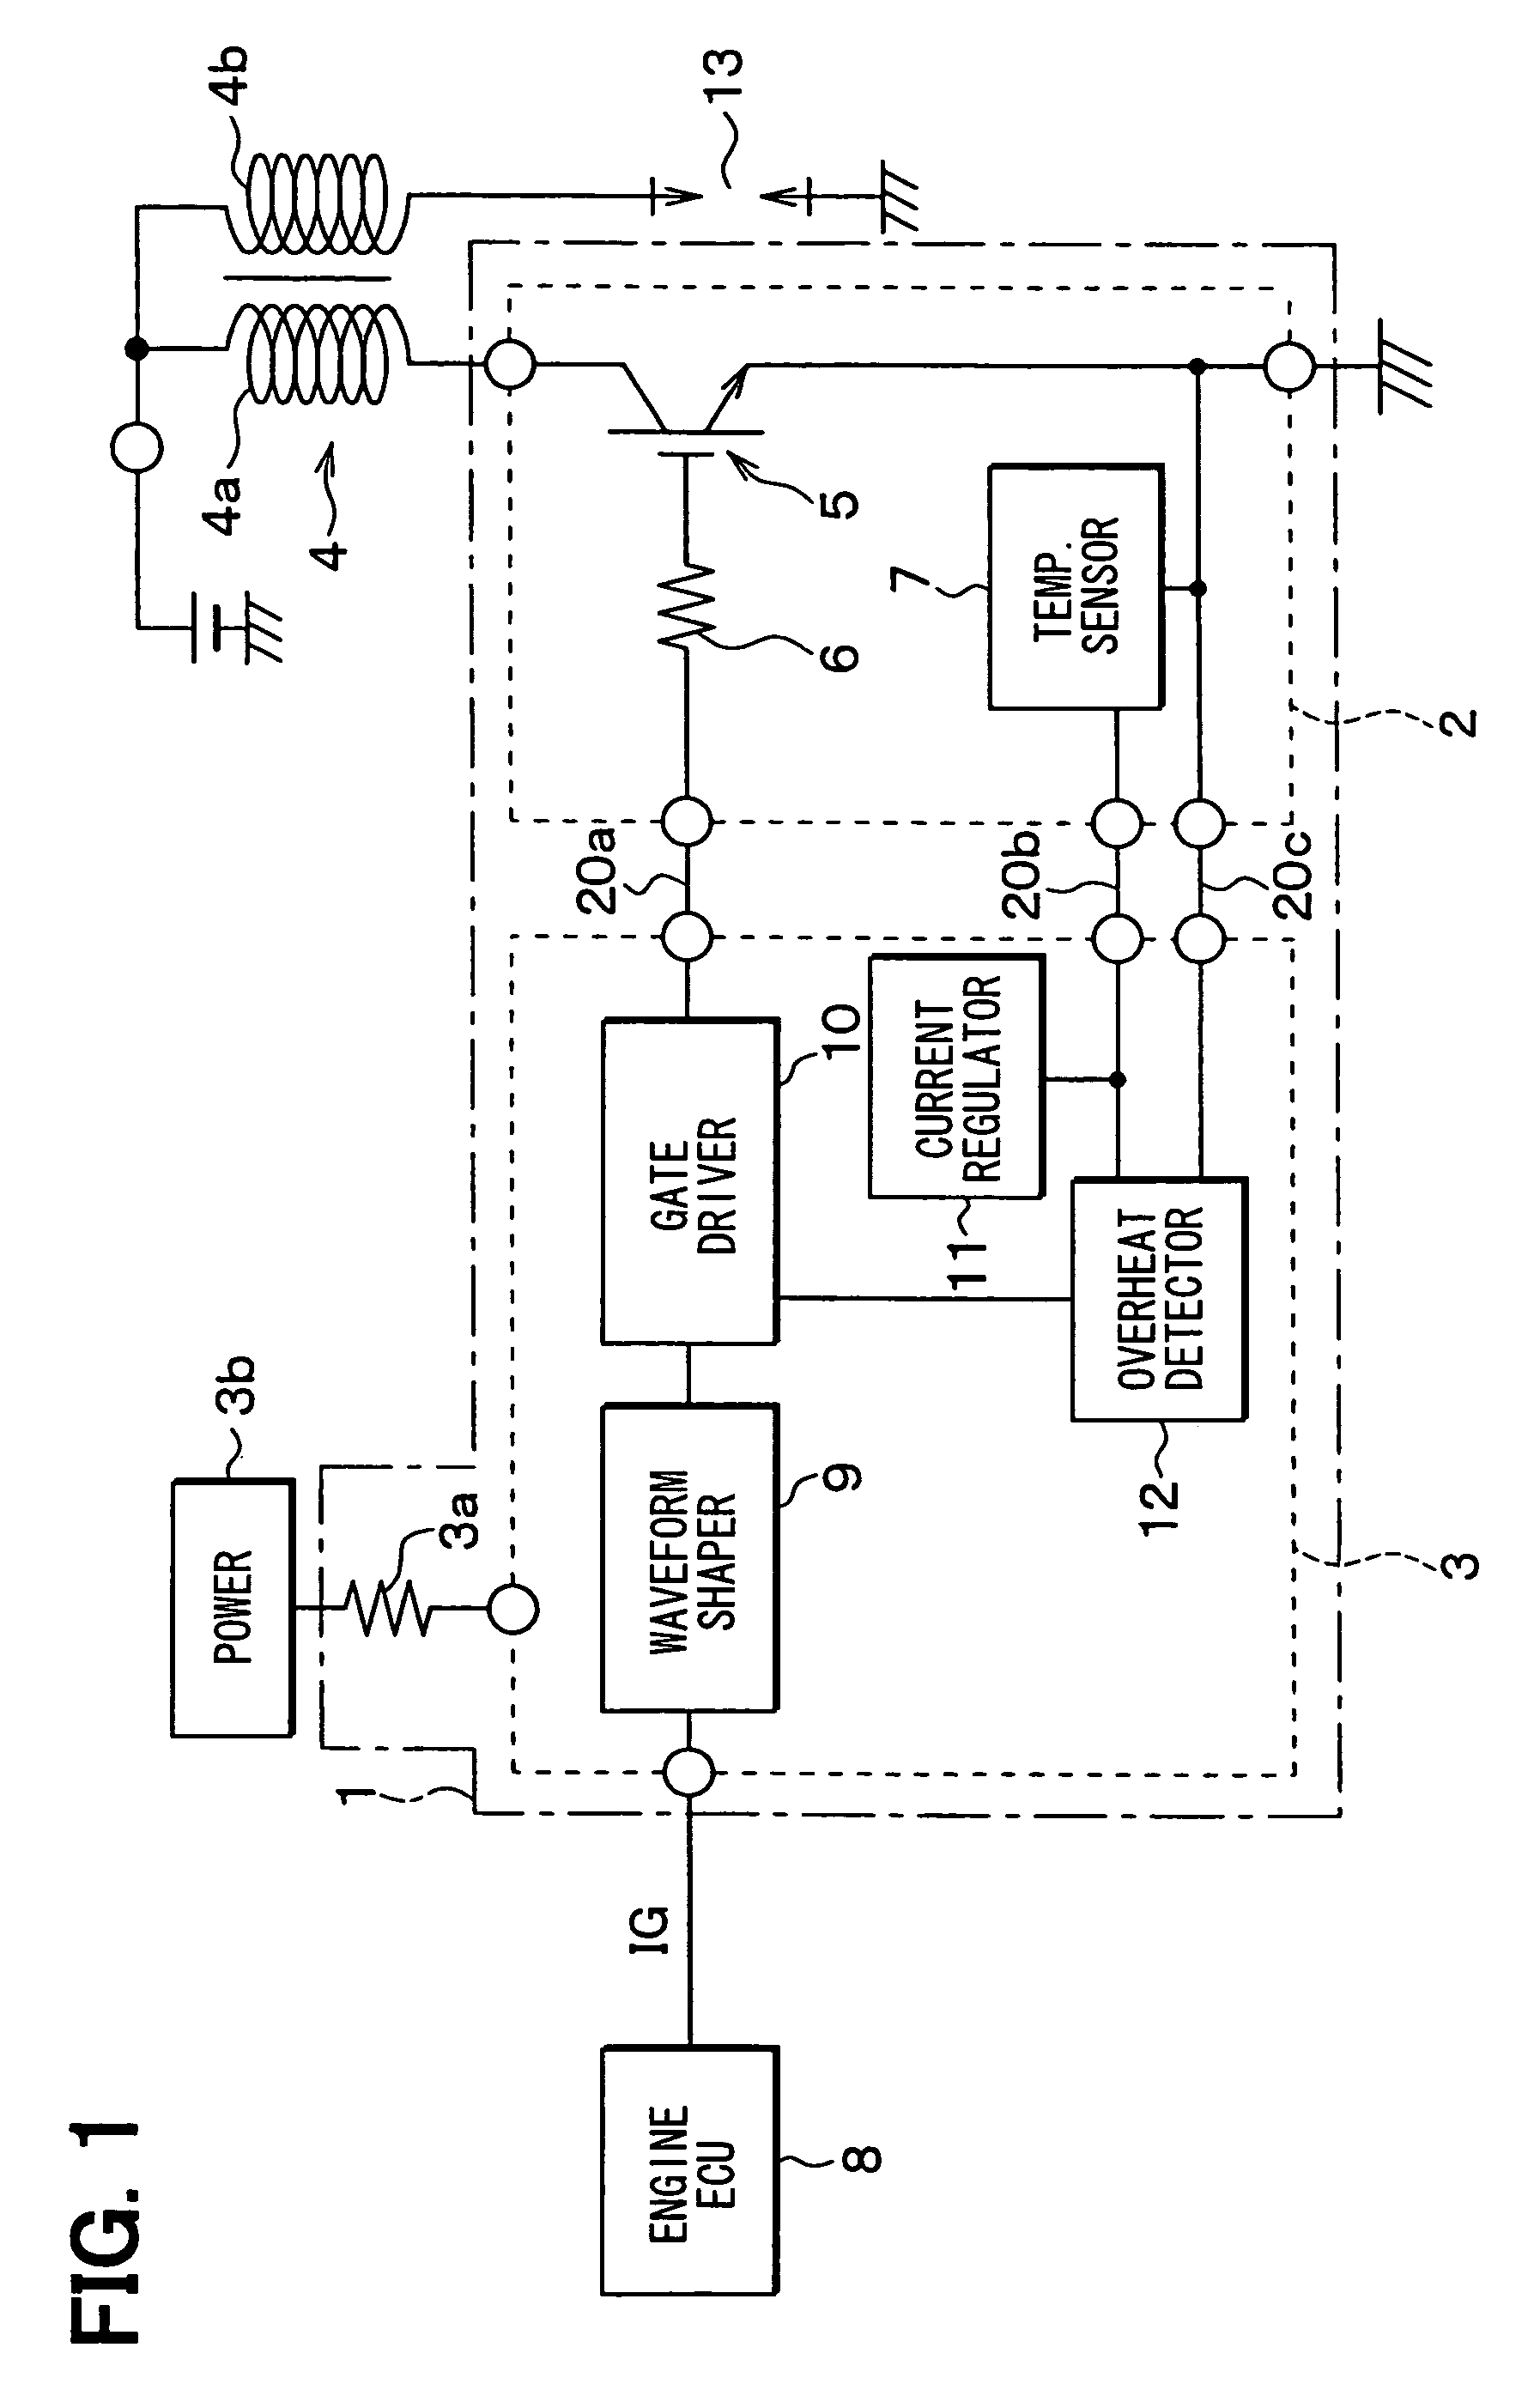 Power switching control device for electric systems